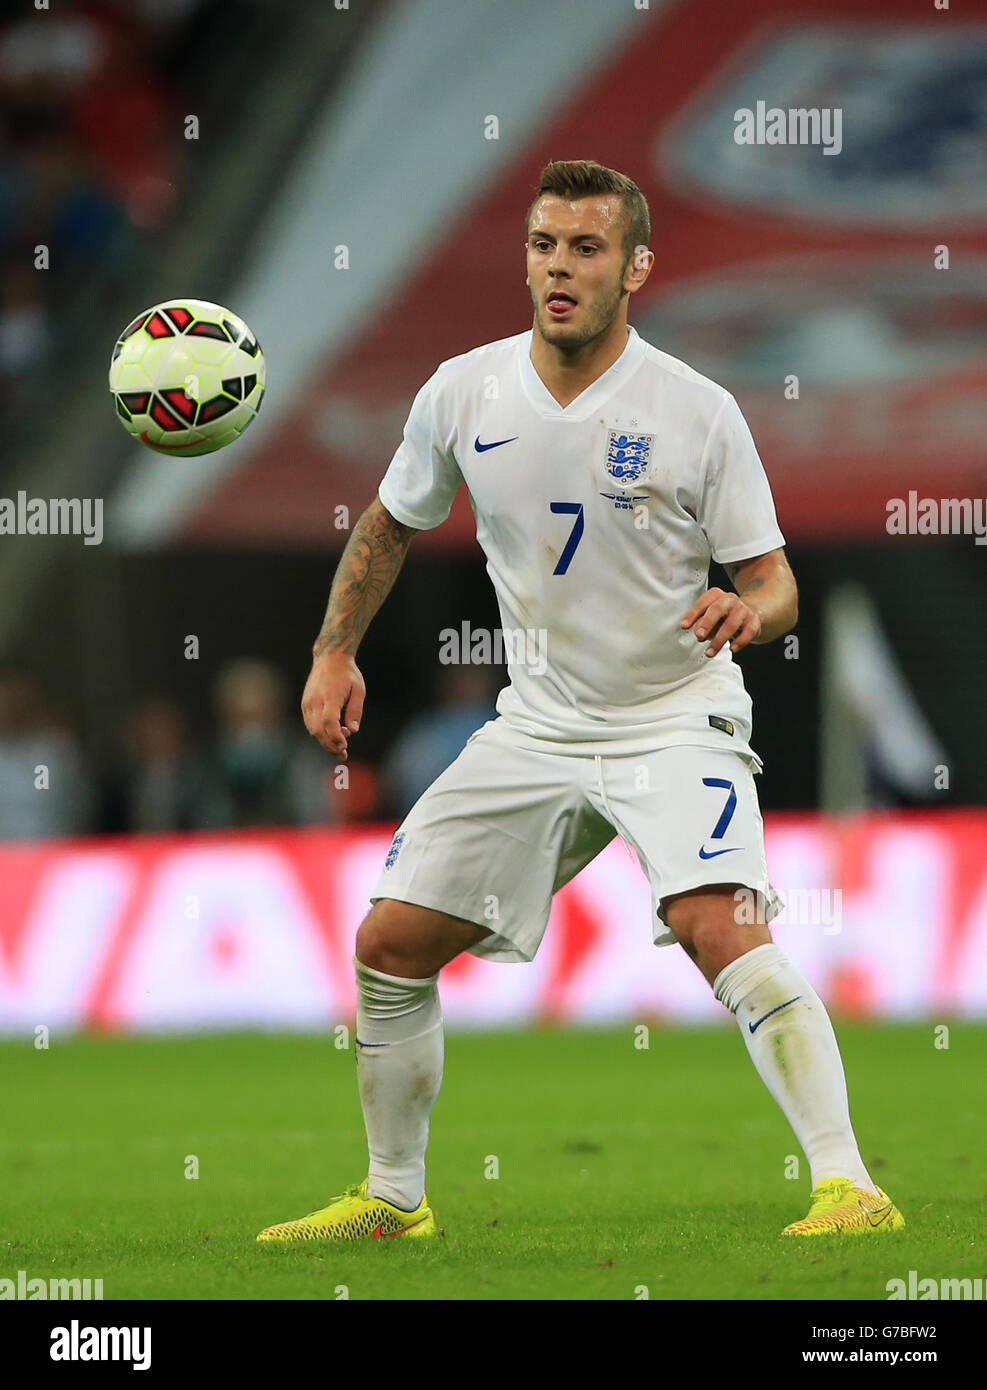 England's Jack Wilshere during the International Friendly at Wembley Stadium, London. PRESS ASSOCIATION Photo. Picture date: Wednesday September 3, 2014. See PA story SOCCER England. Photo credit should read: Nick Potts/PA Wire. Stock Photo